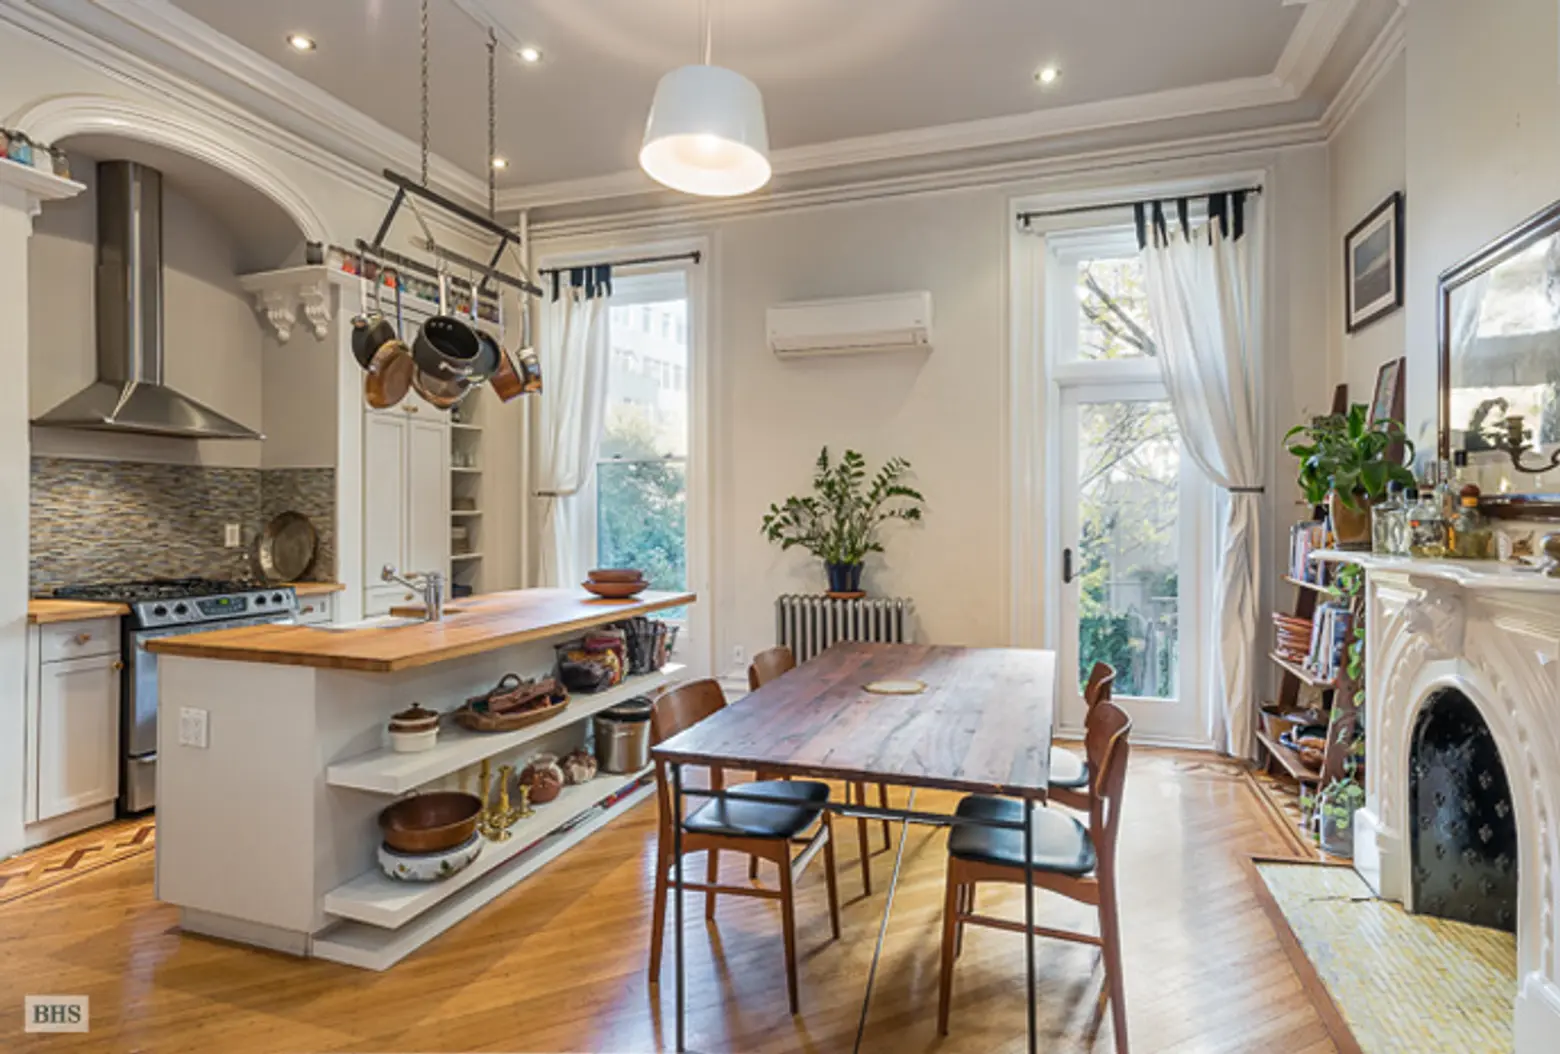 75 Willoughby Avenue, Cool Listings, Fort Greene, Clinton Hill, Brownstone, Townhouse, Brownstone Duplex for rent, townhouse rental, historic homes